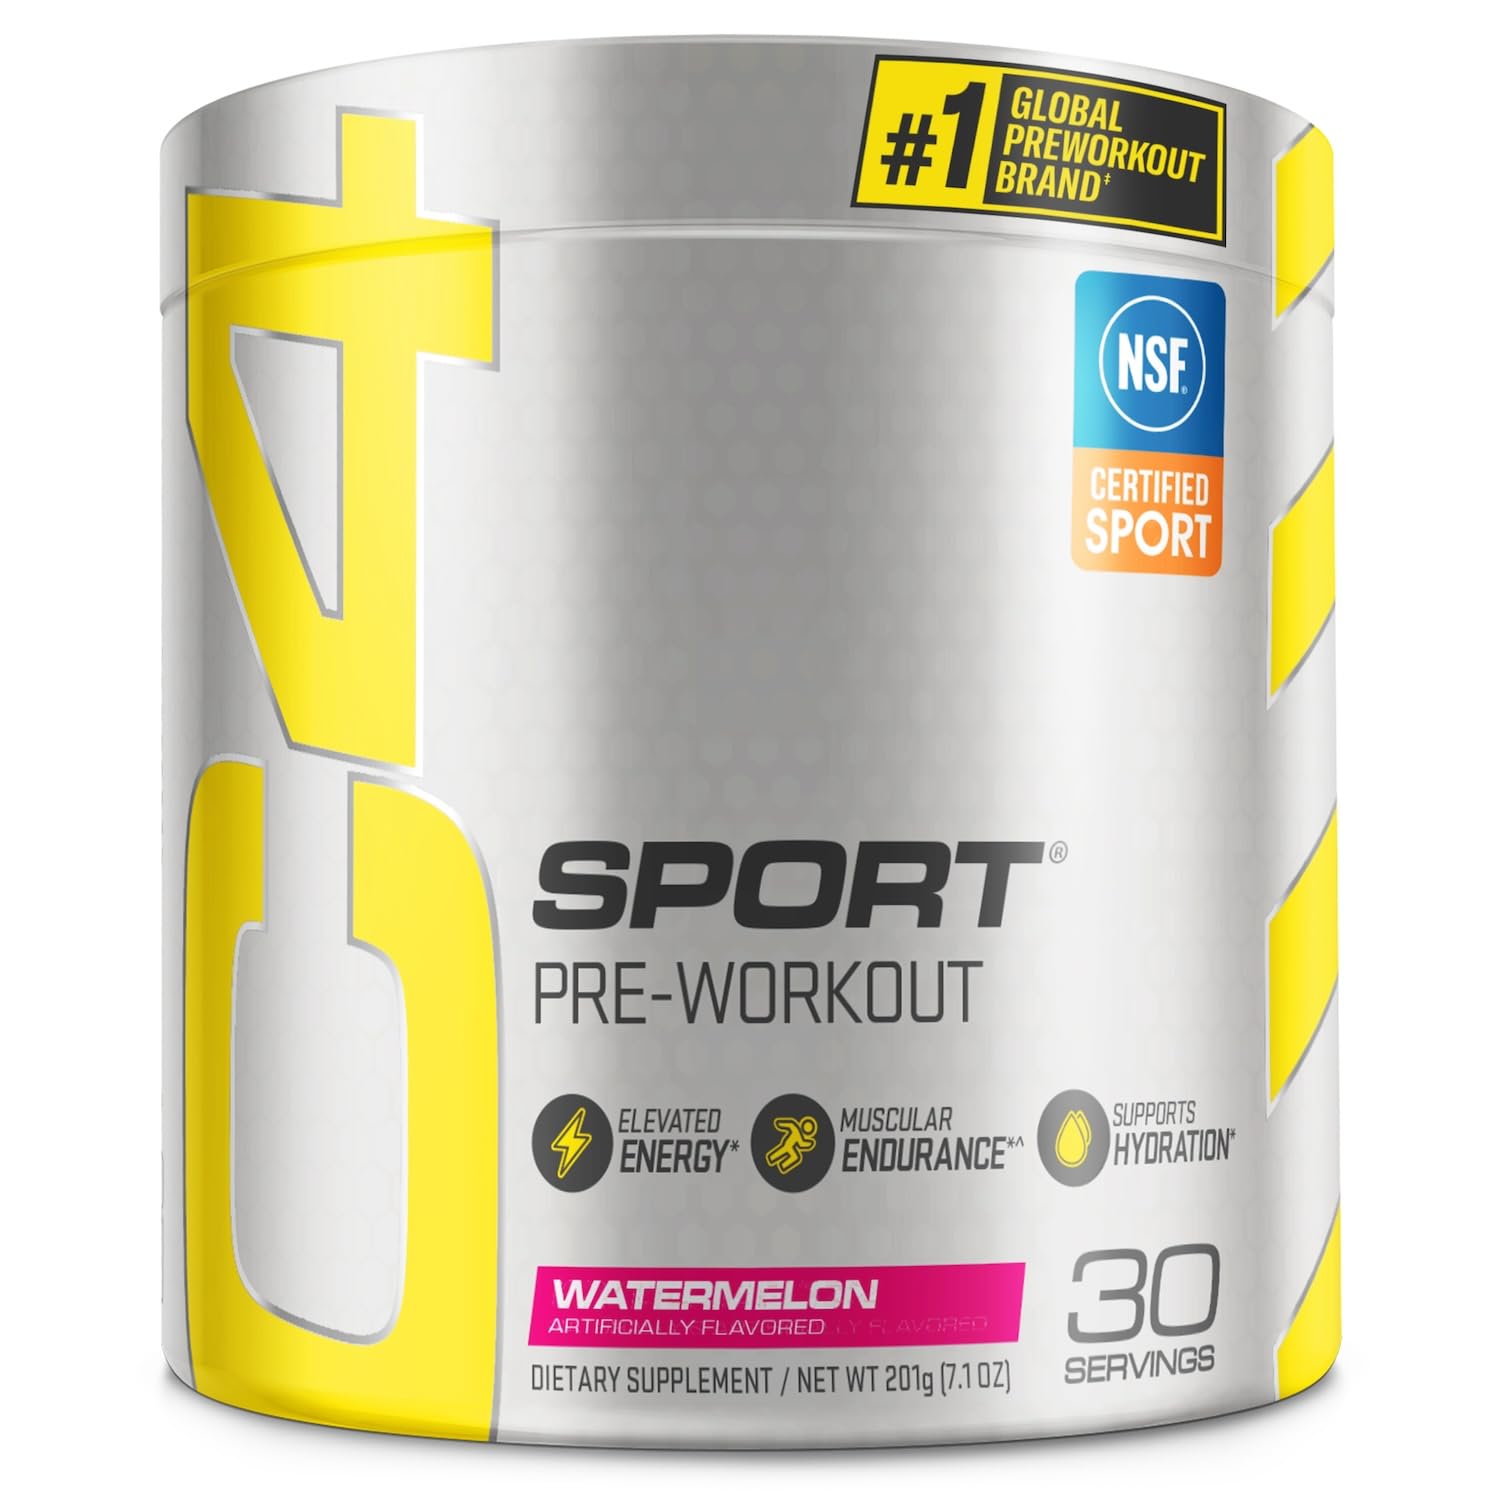 C4 Ripped Sport Pre Workout Powder Fruit Punch - NSF Certified for Sport + Sugar Free & C4 Sport Pre Workout Powder Watermelon - Pre Workout Energy with Creatine + 135mg Caffeine